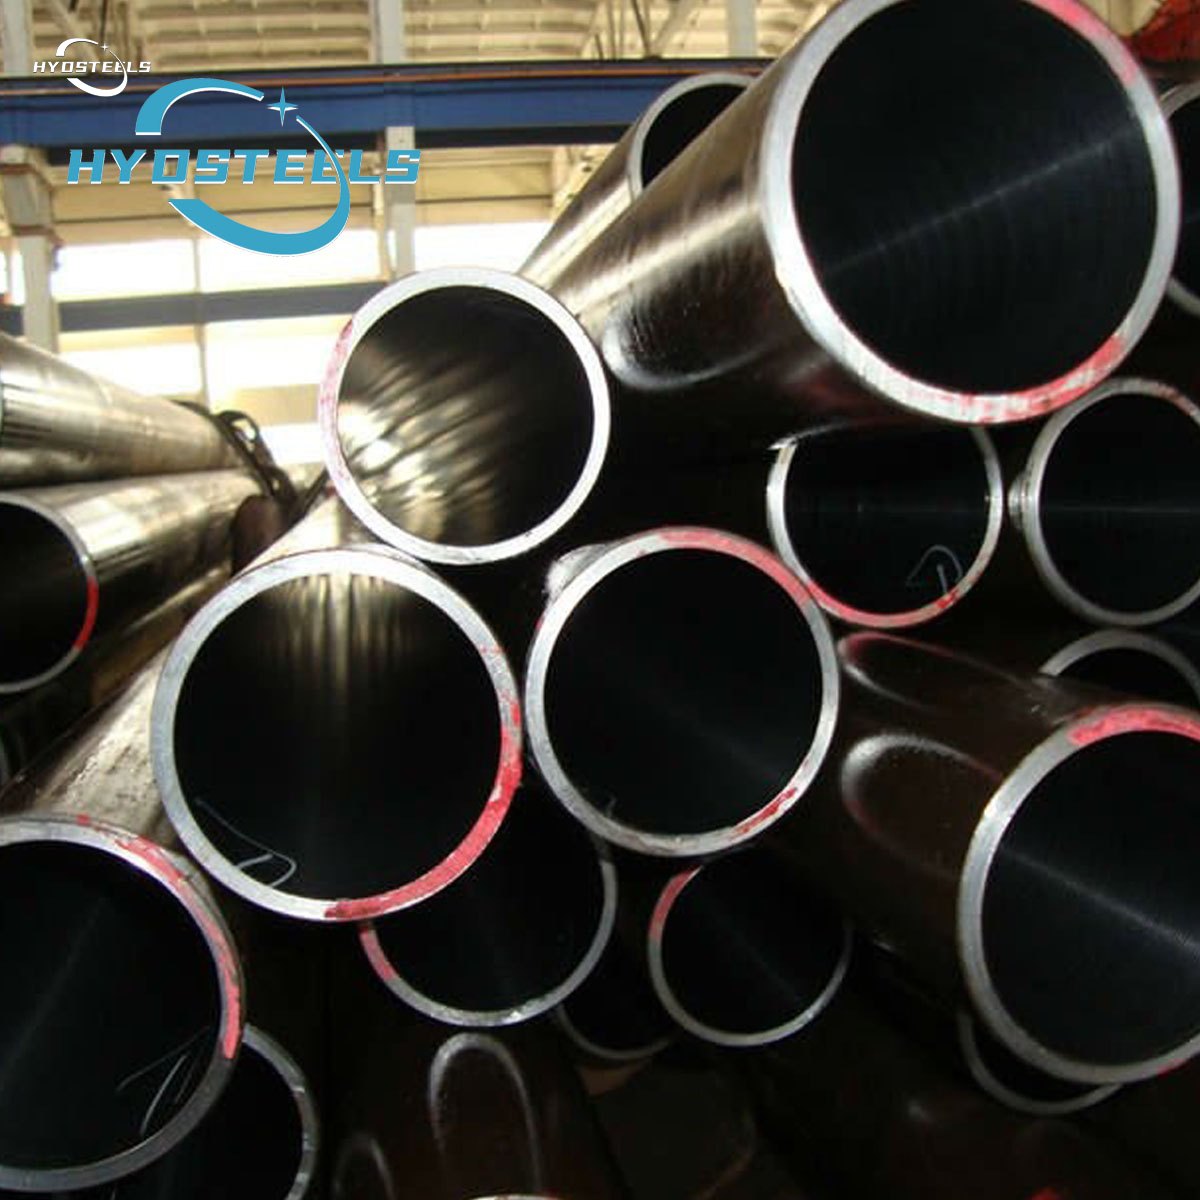 Large Bore Forged Cylinder Barrel for Hydraulic Cylinder